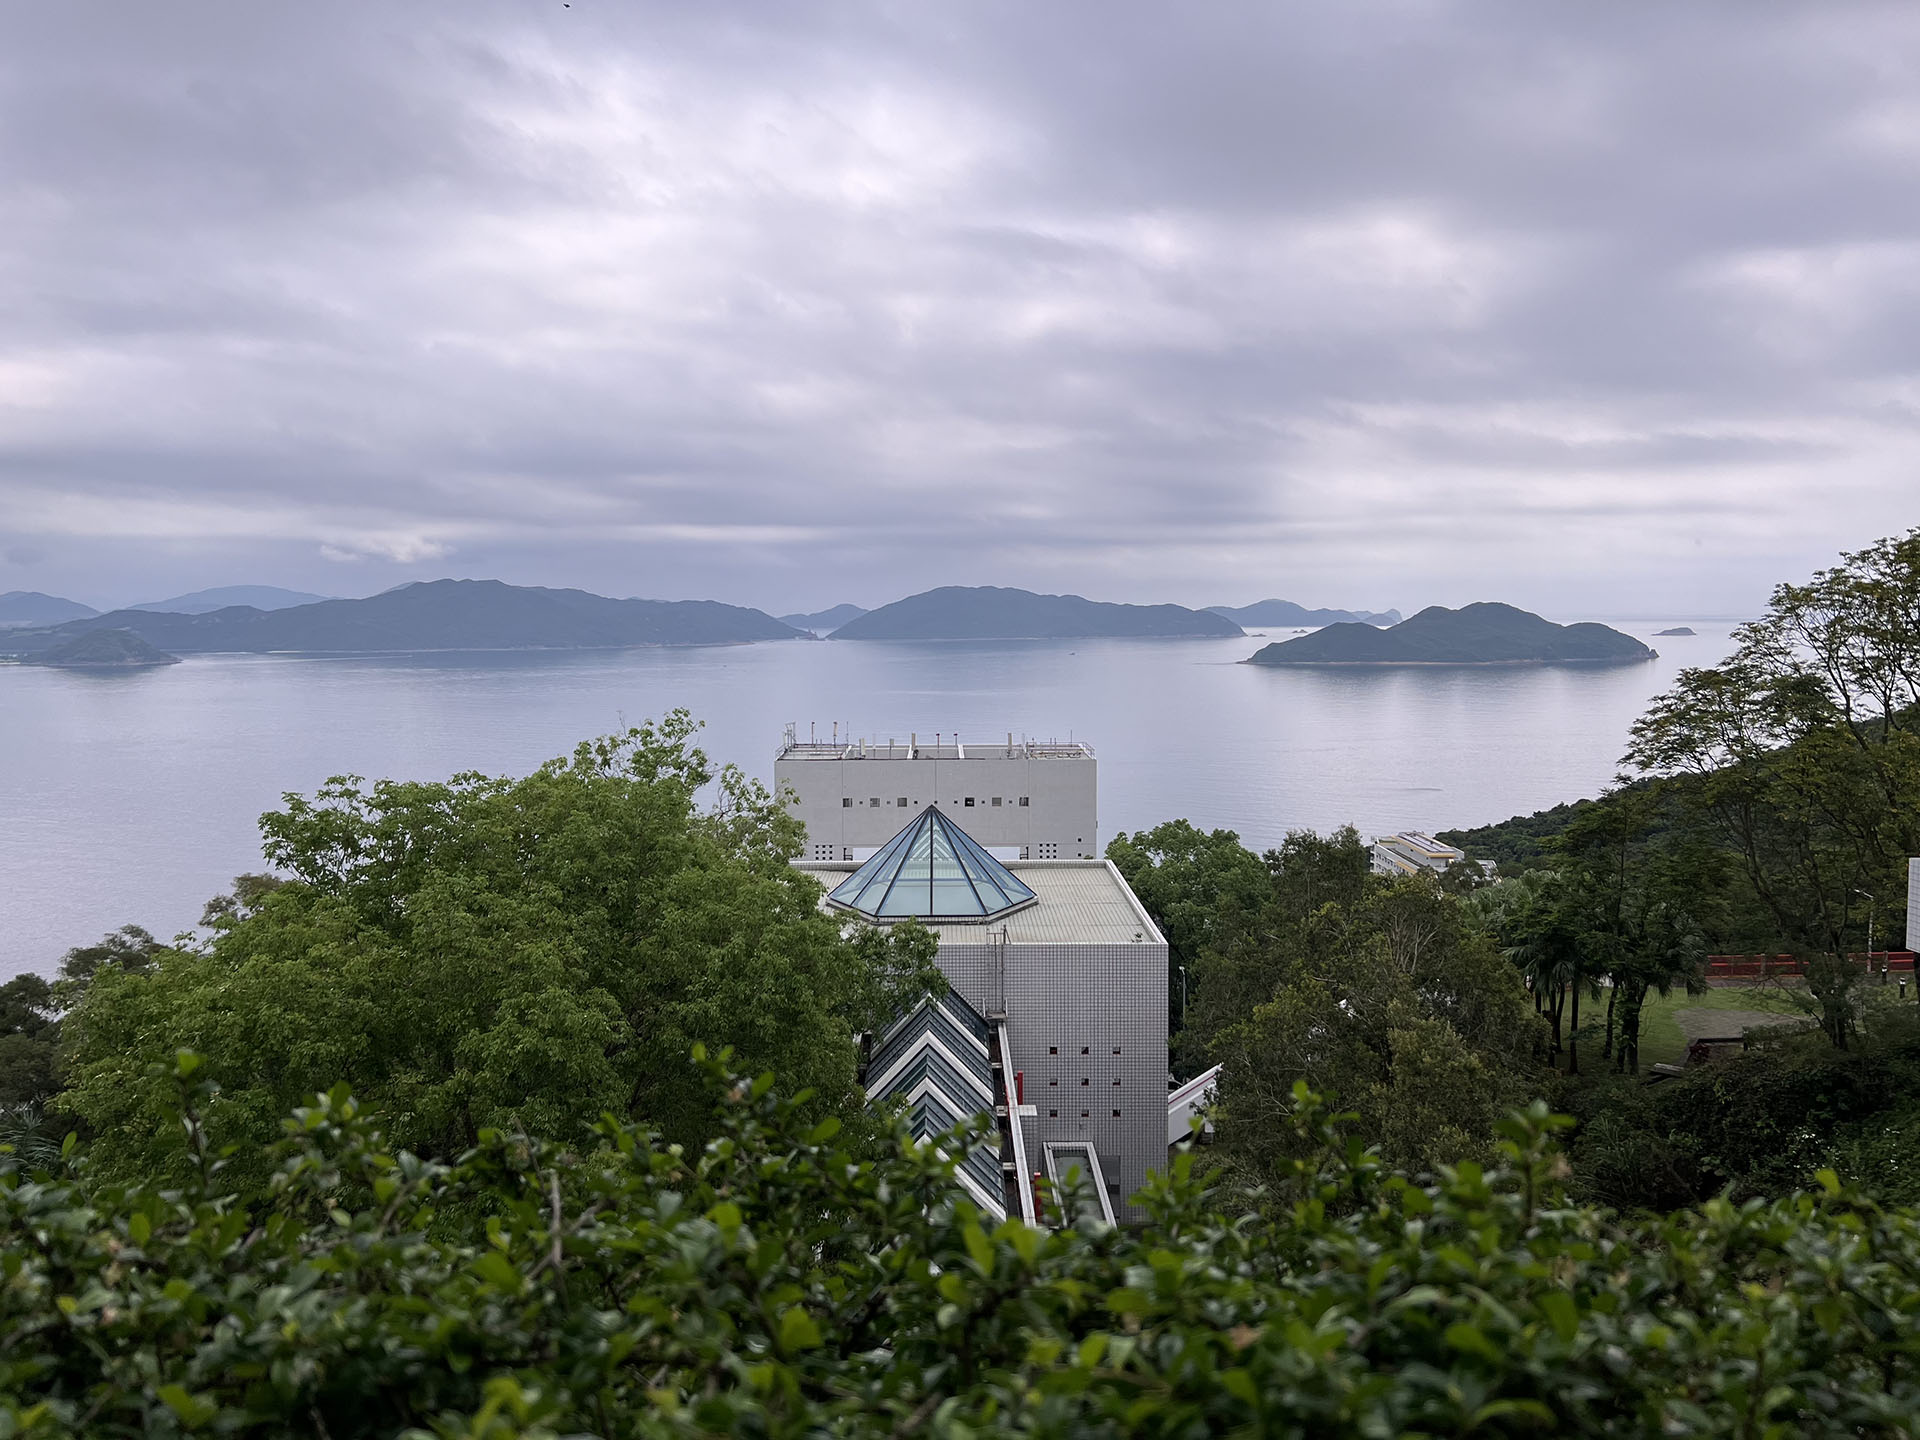 HKUST Observation Deck with Seaside Scenery